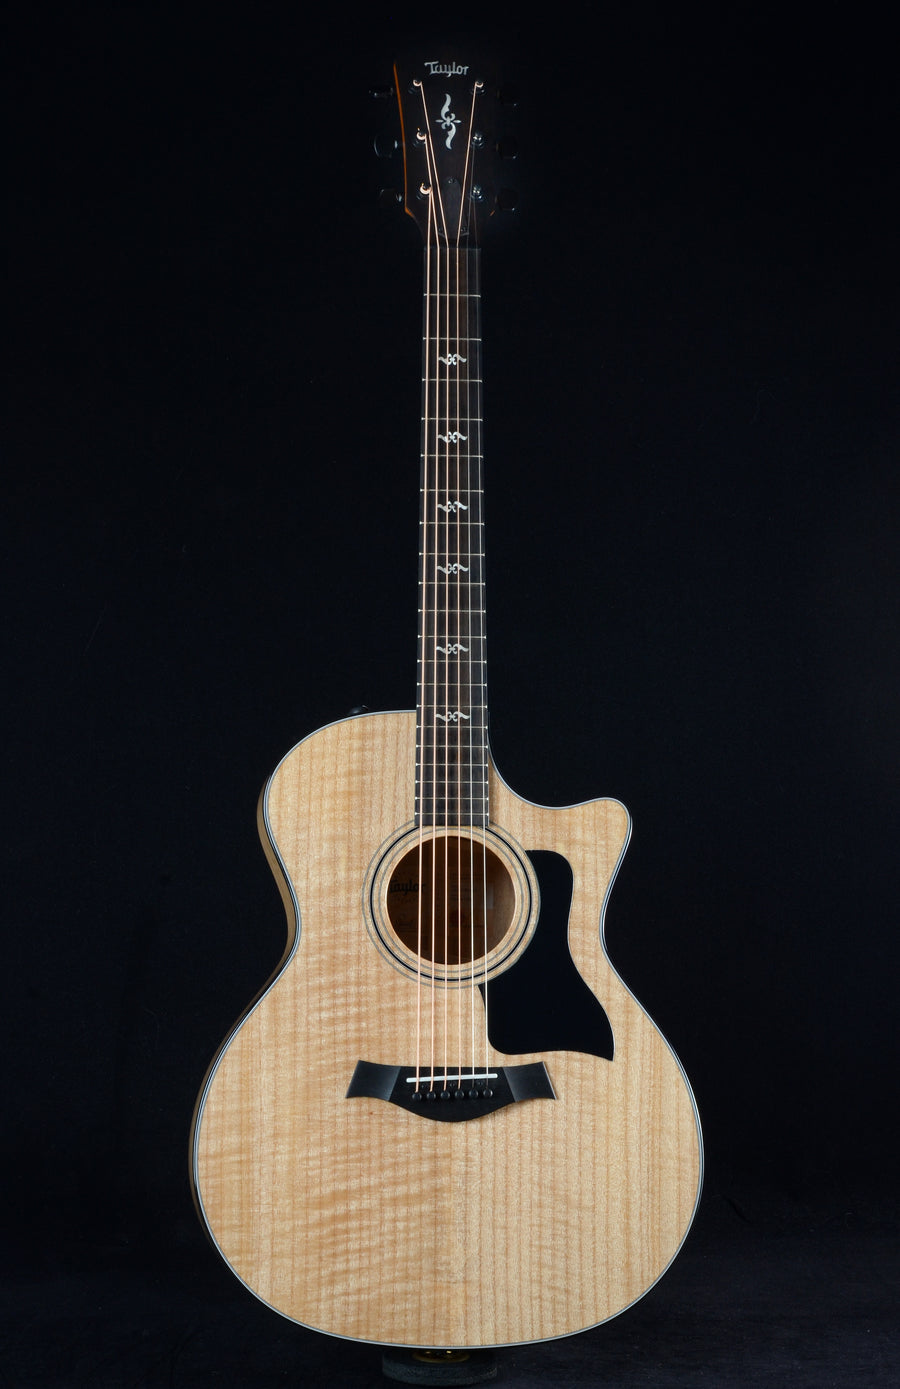 Taylor 424ce Urban Ash Limited Edition - Natural